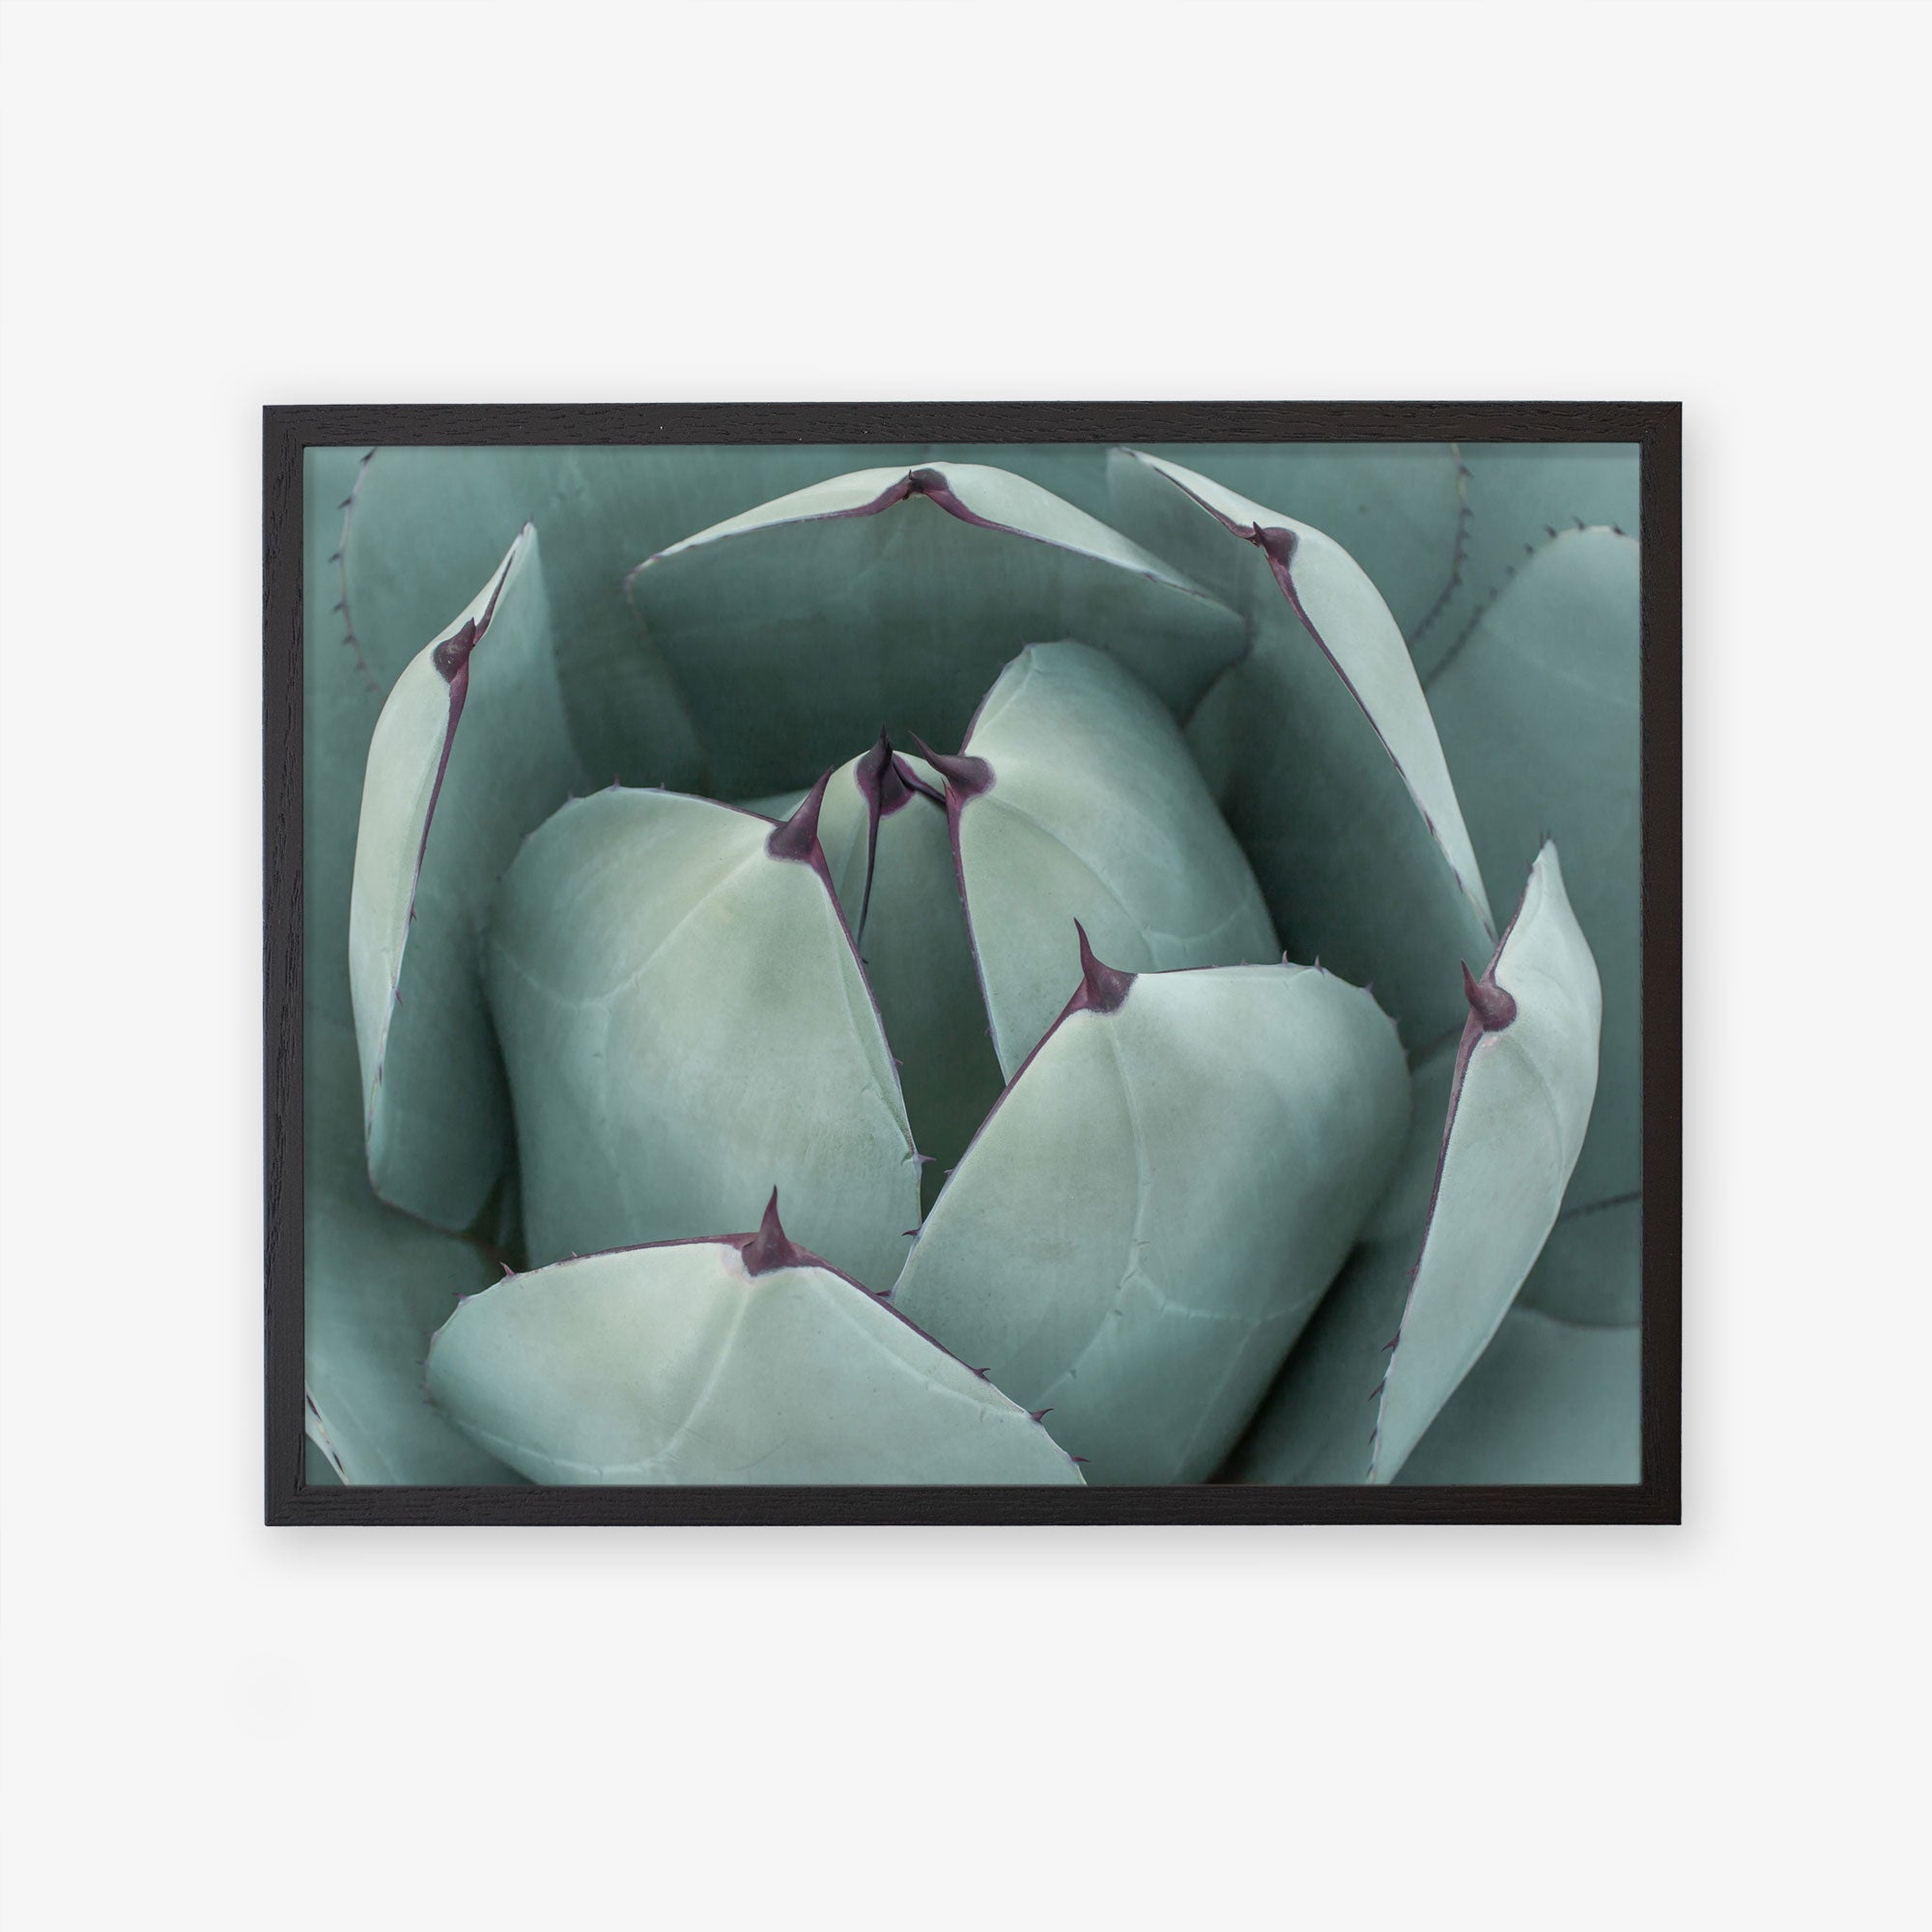 A close-up photo of a succulent plant with thick, pale green leaves tipped with small, sharp purple points, displayed as an Offley Green unframed &#39;Abstract Teal Green Botanical Print, Teal Petals&#39;.